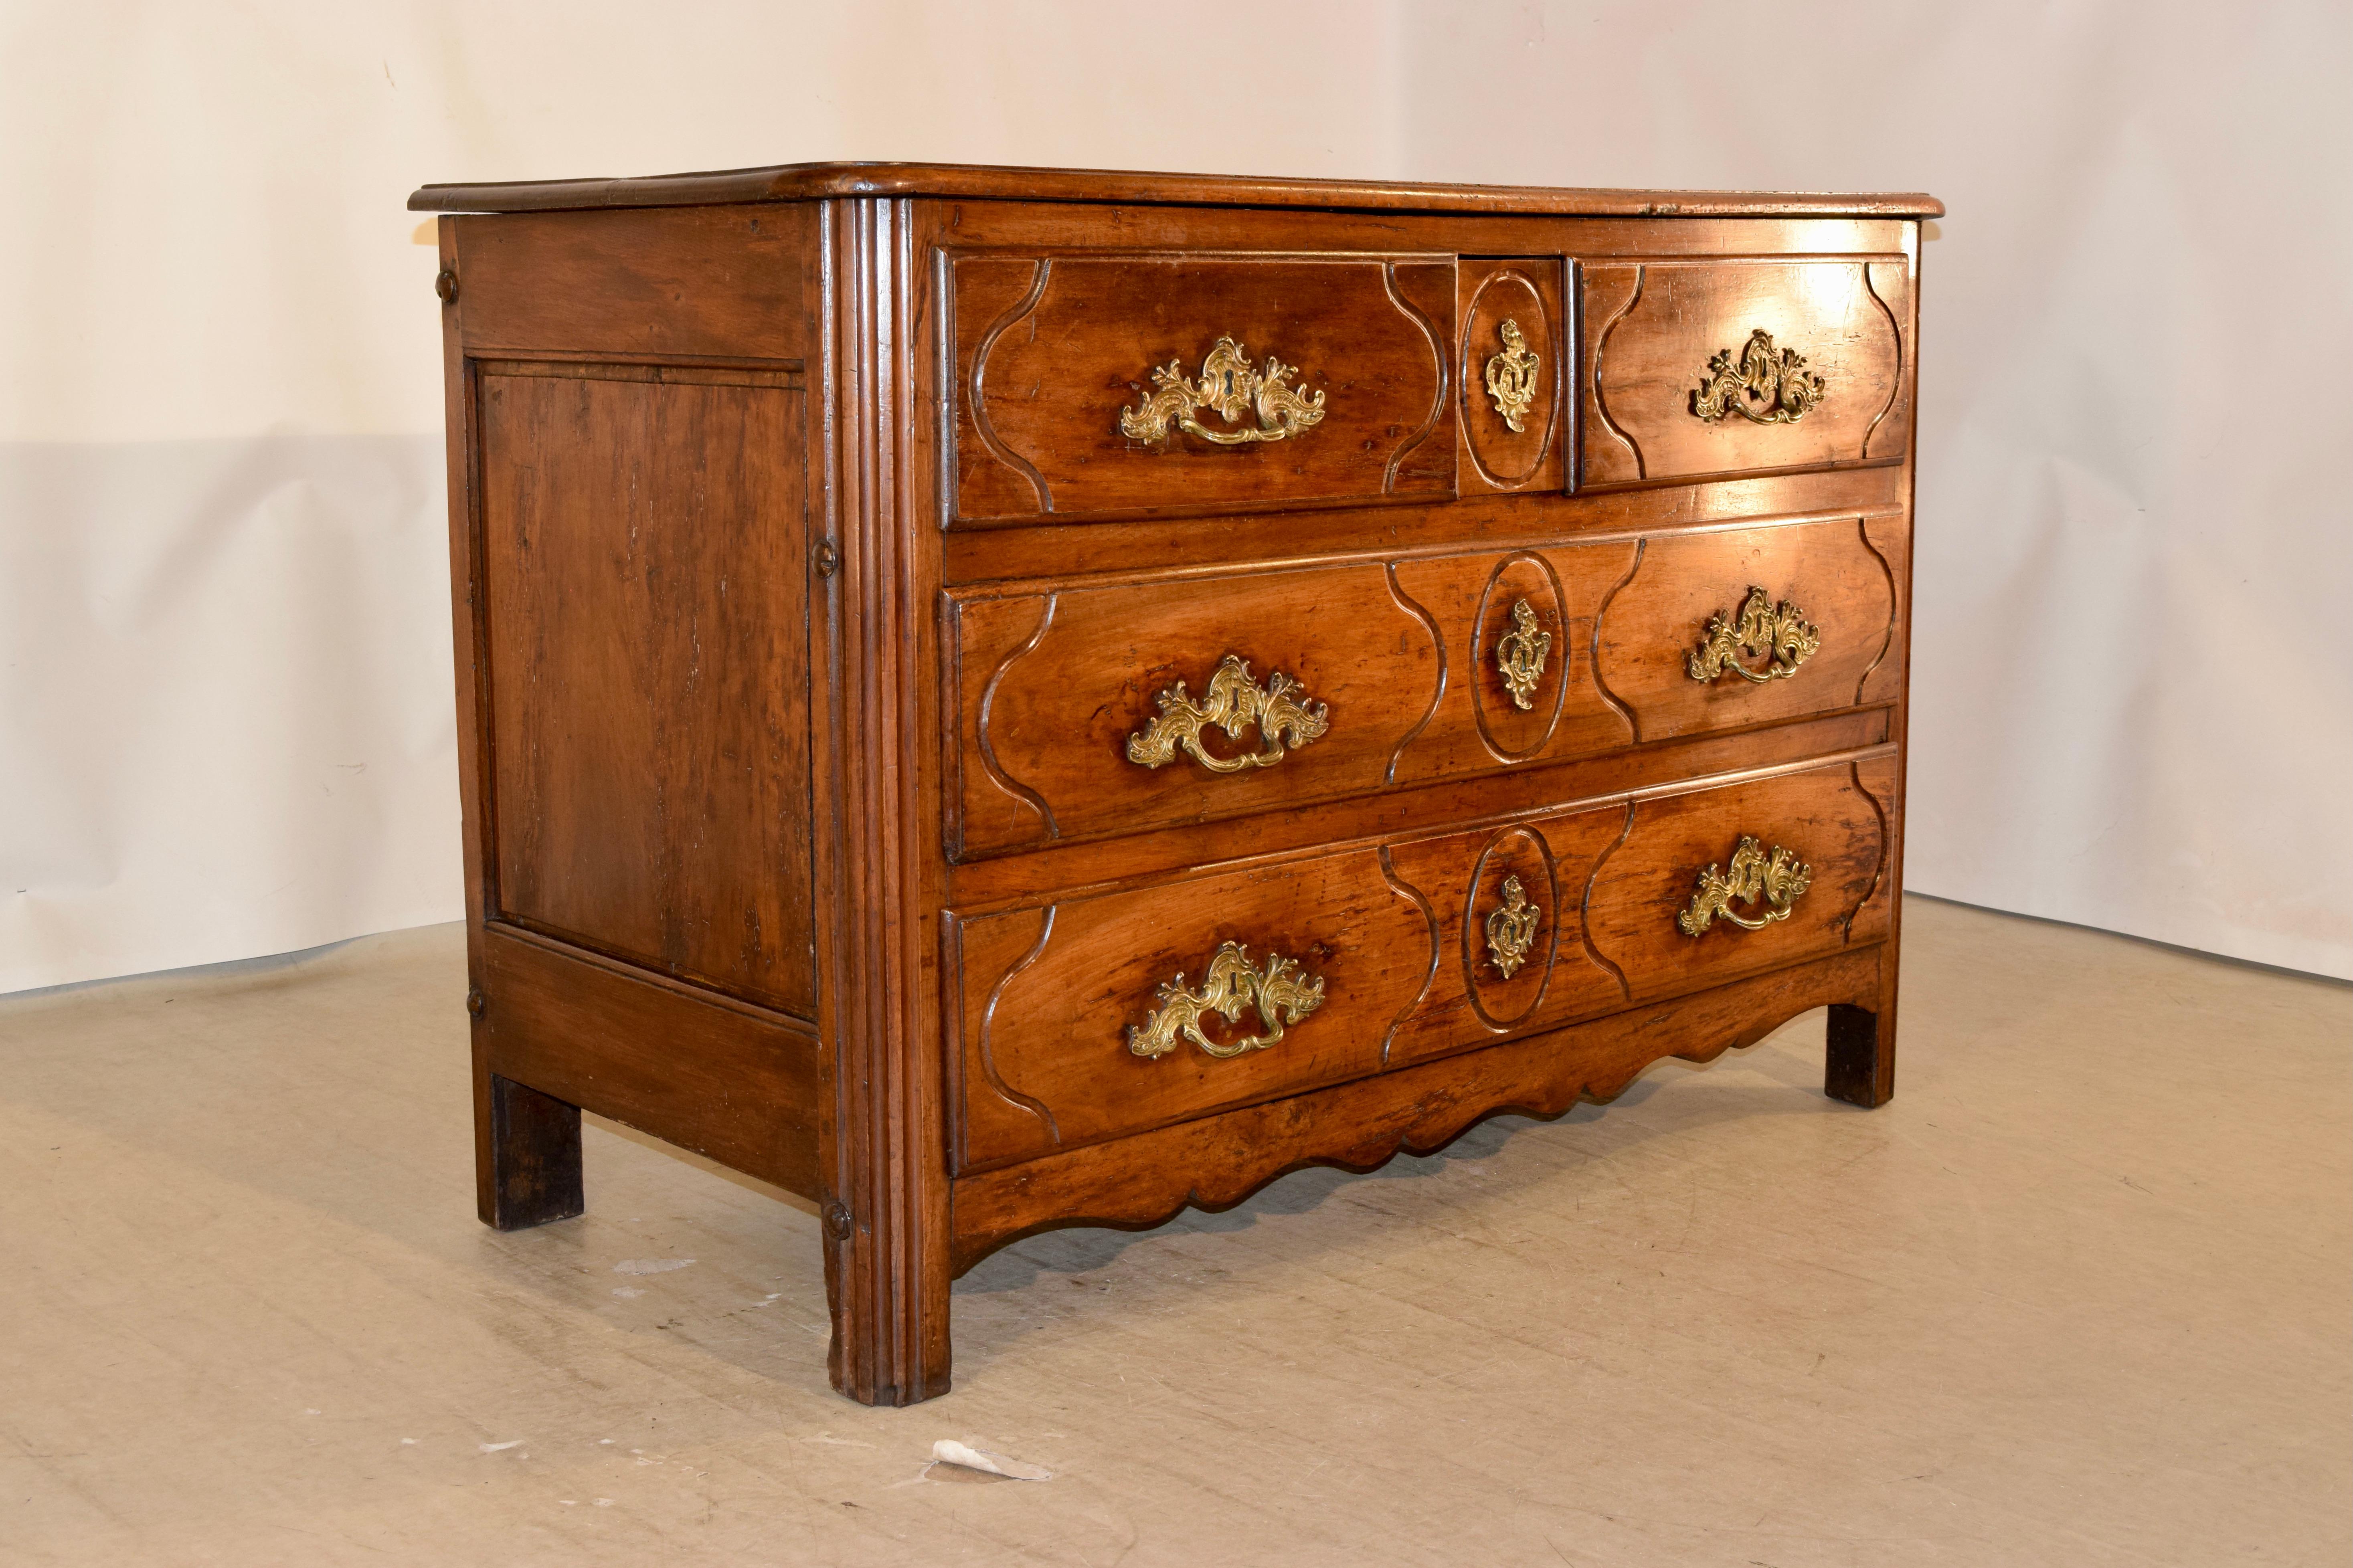 18th century rare campaign commode from France that breaks down completely flat for moving. The top is beveled around the edge over hand paneled sides and two drawers over two drawers, all with beveled edges and carved decorated drawer fronts and